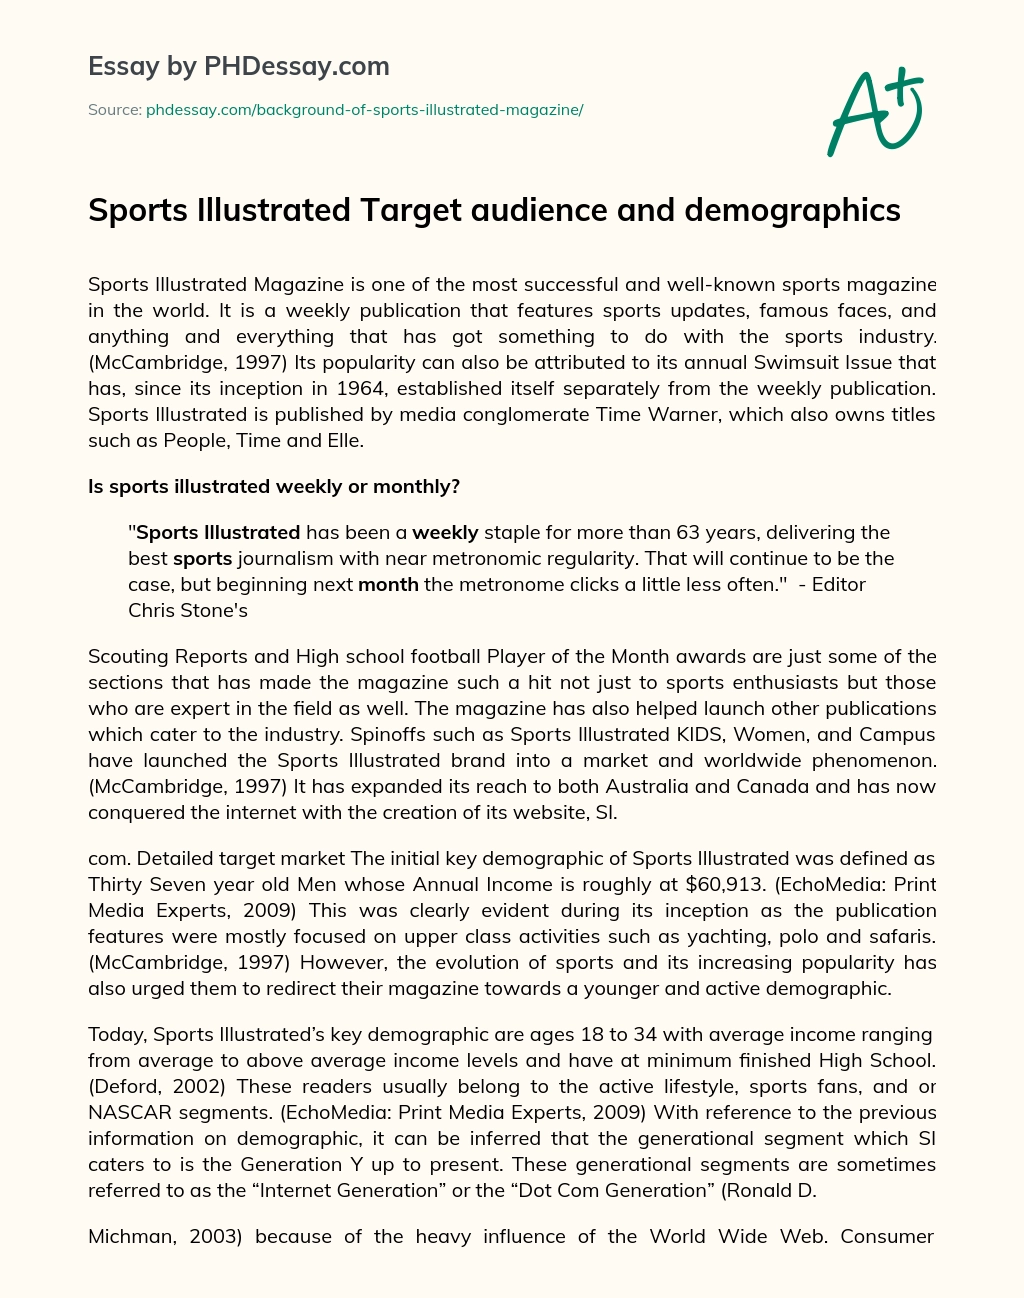 Sports Illustrated Target Audience and Demographics essay